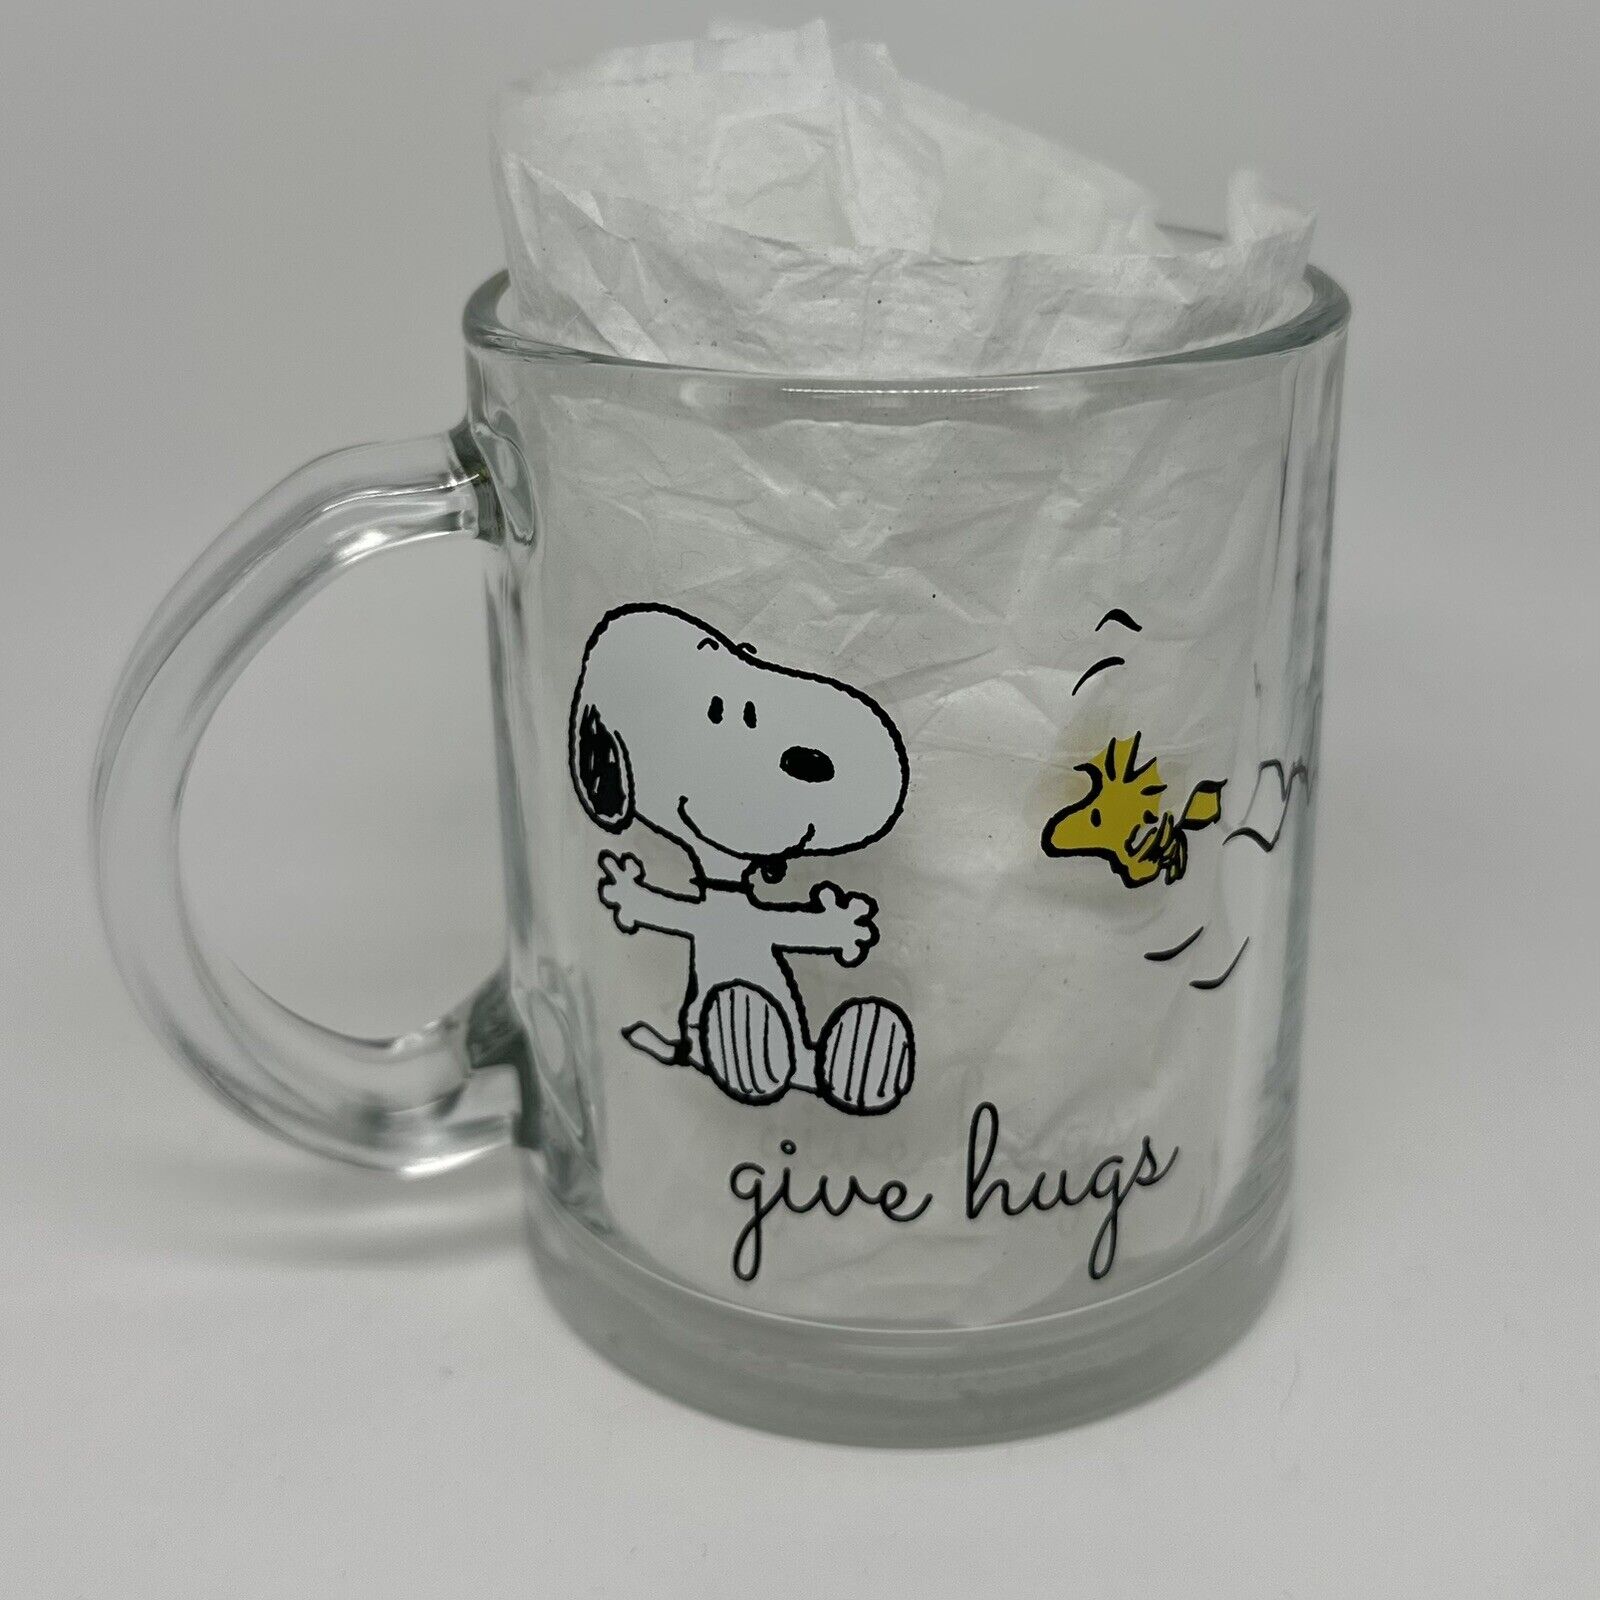 Peanuts-Vintage Inspired-Snoopy and Woodstock Give Hugs Clear Glass Mug NEW Rare